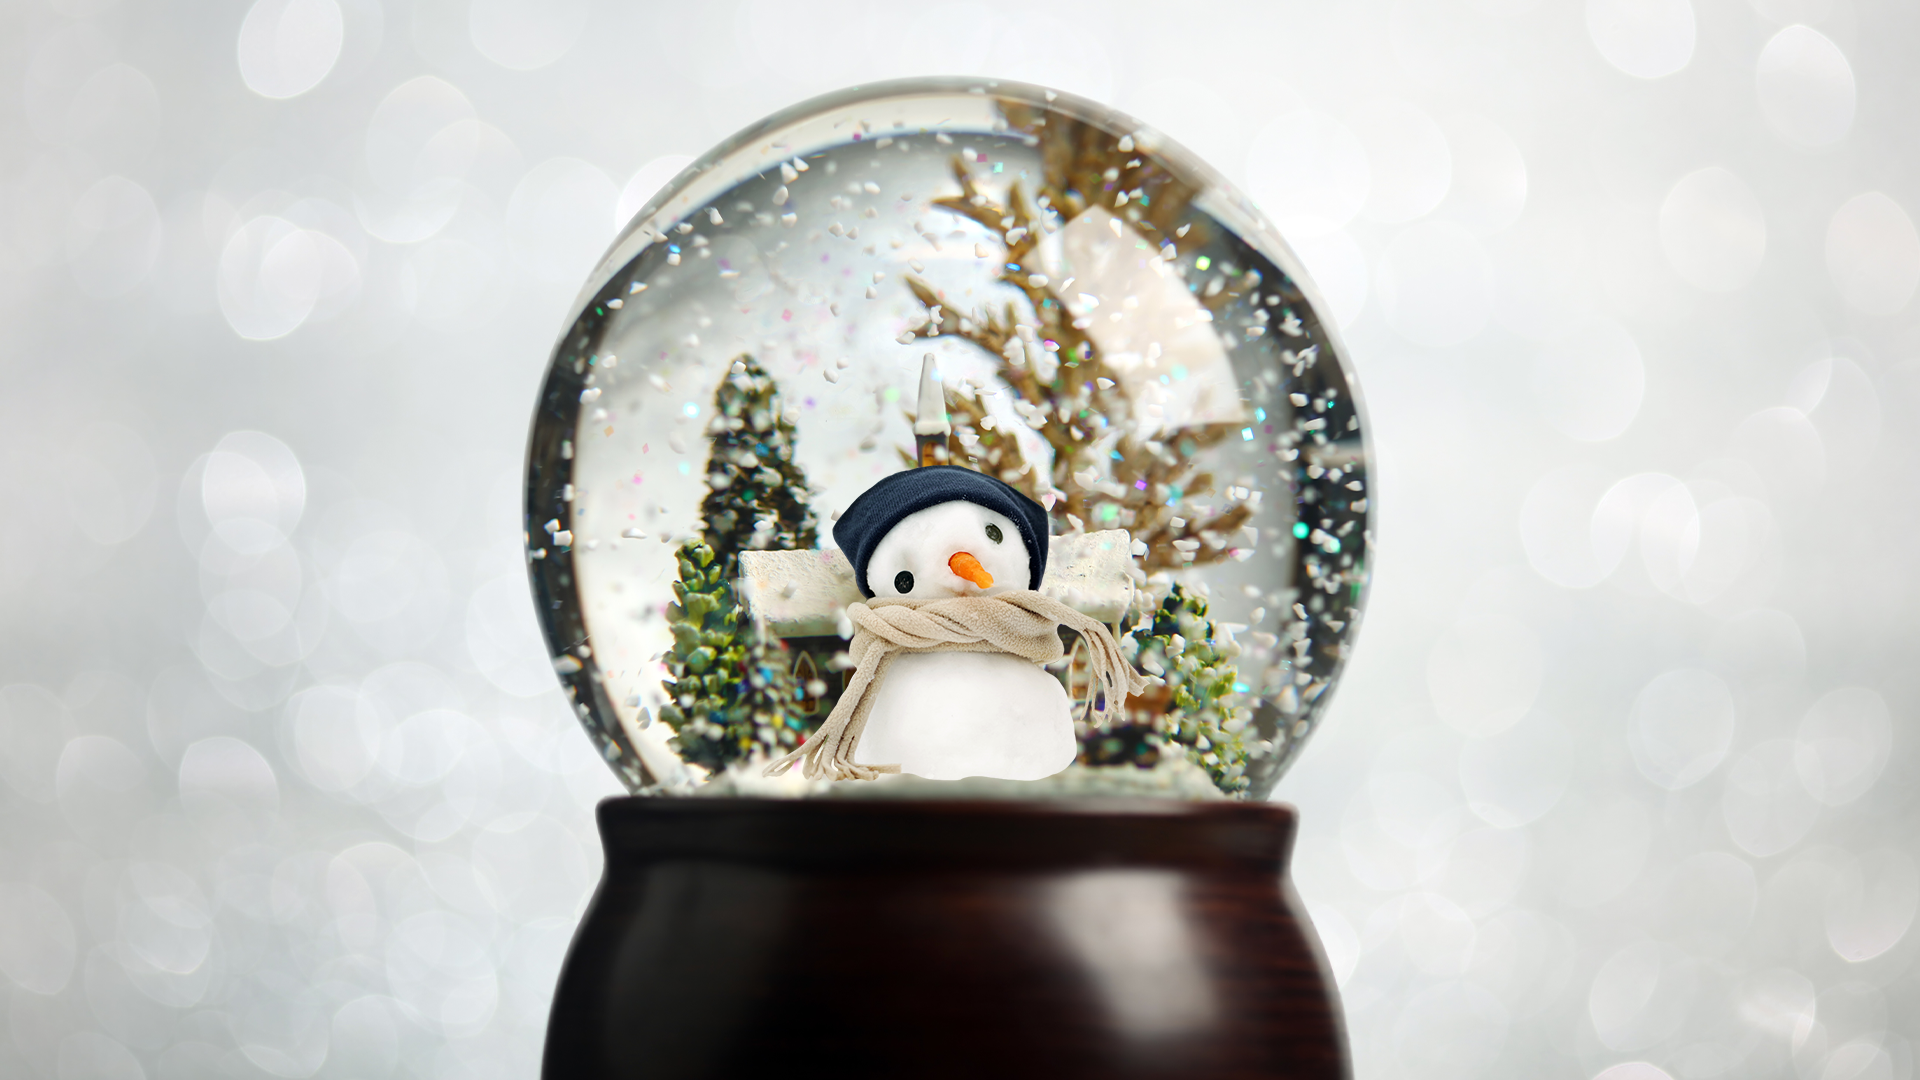 A snowglobe with a Beano snowman in it